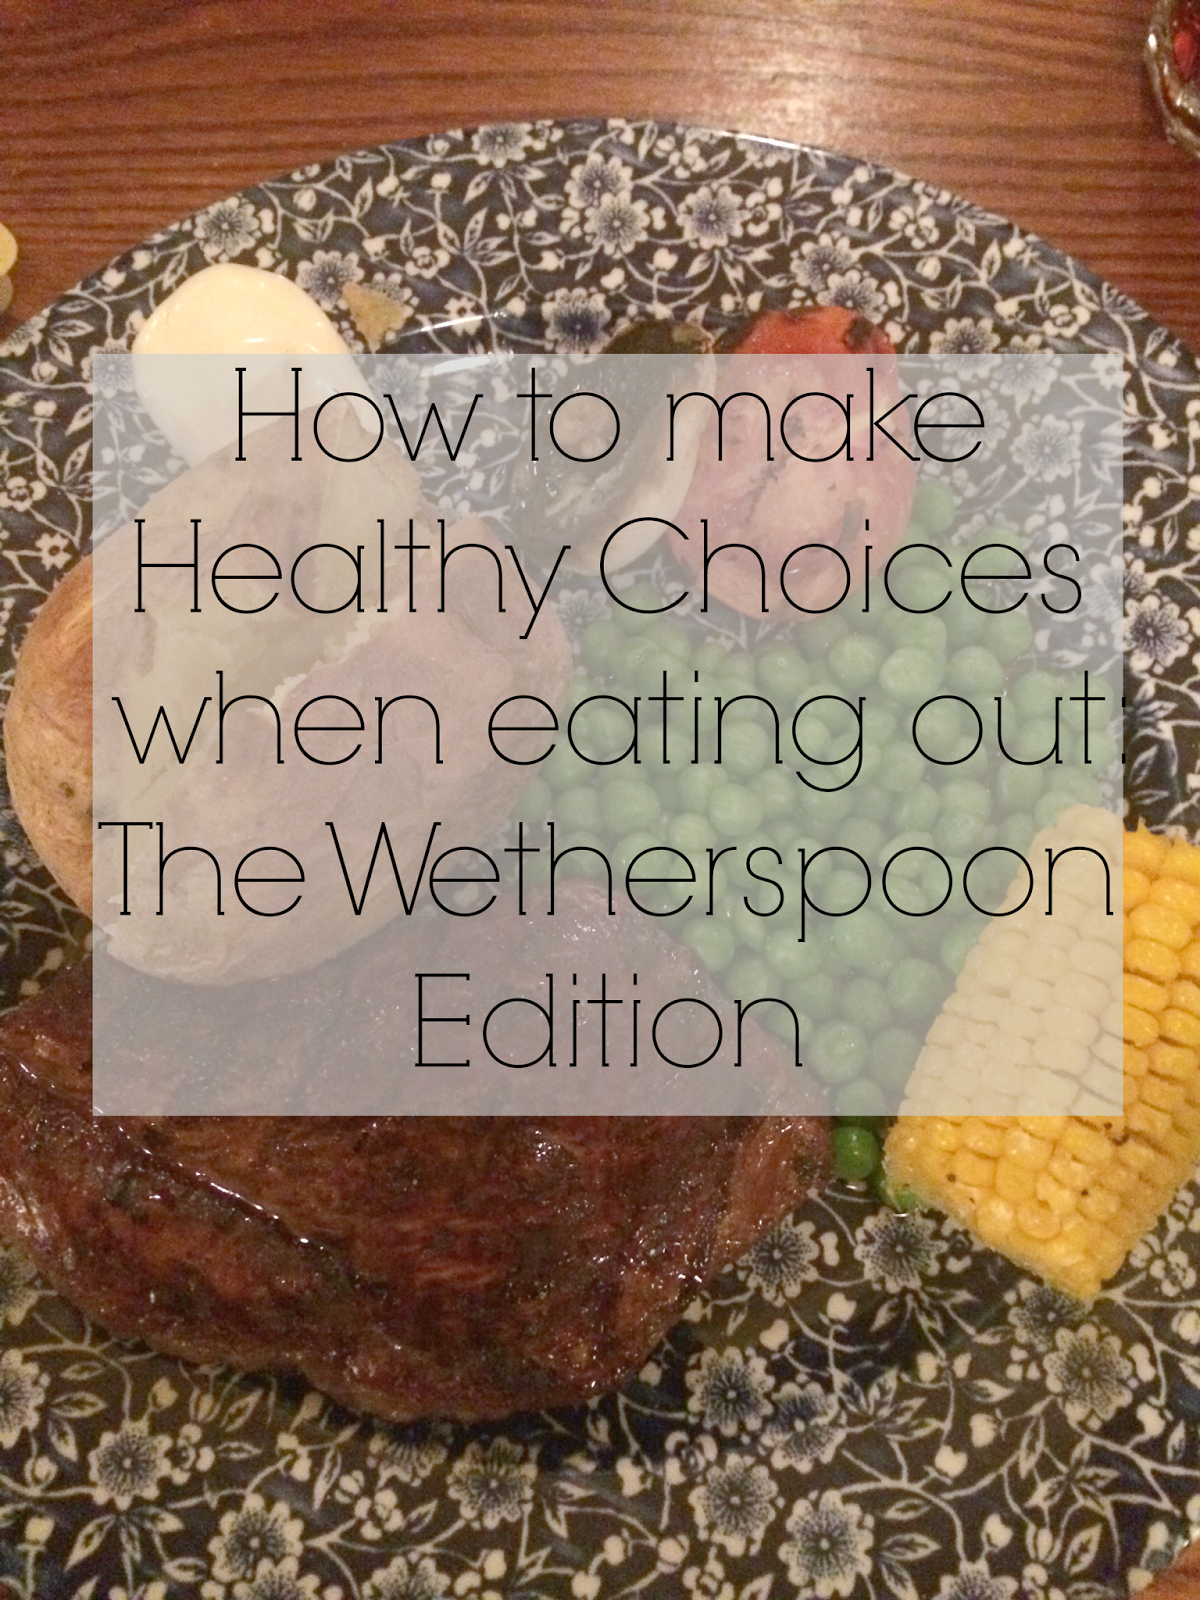 Making-Healthy-Choices-in-Wetherspoon